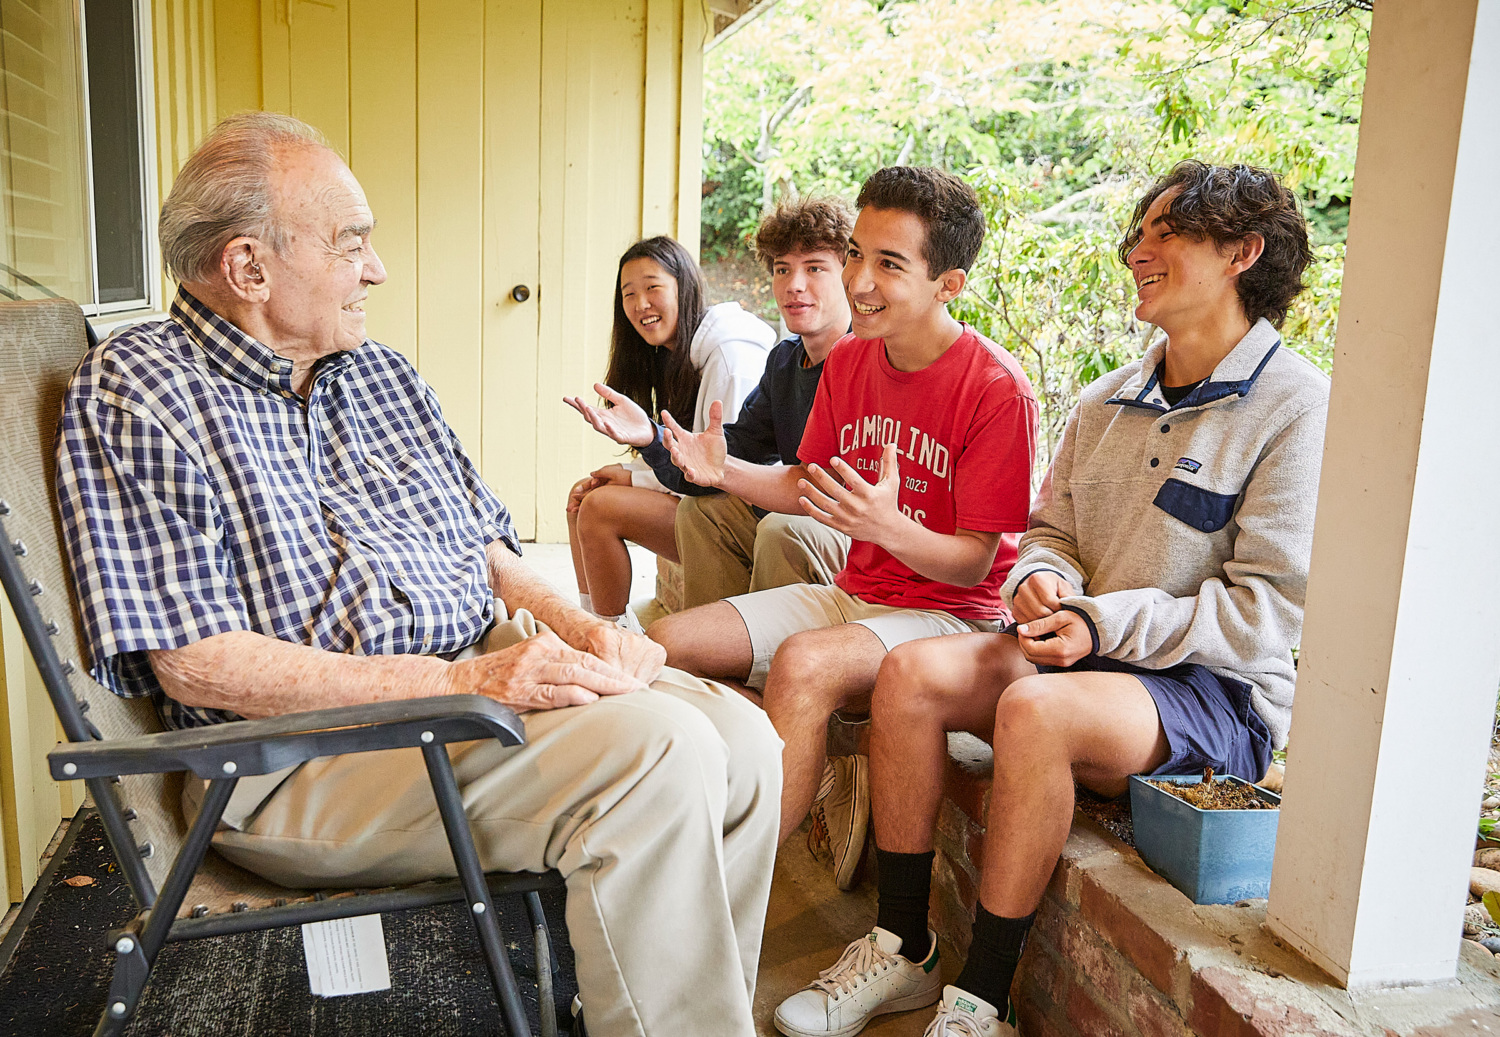 Jake Hammerman and 3 other teens visit on a porch with an elderly man.